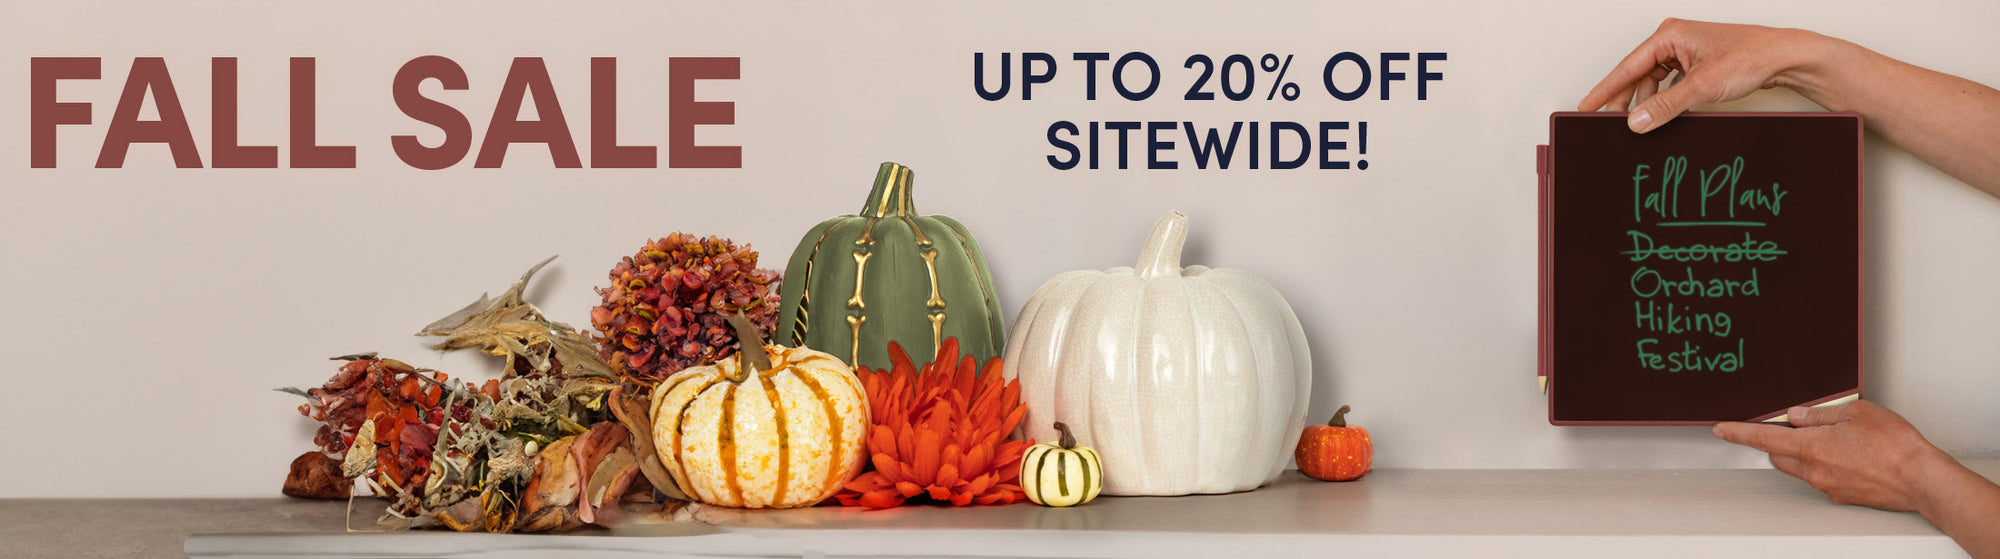 Fall Sale - Up to 20% OFF Sitewide